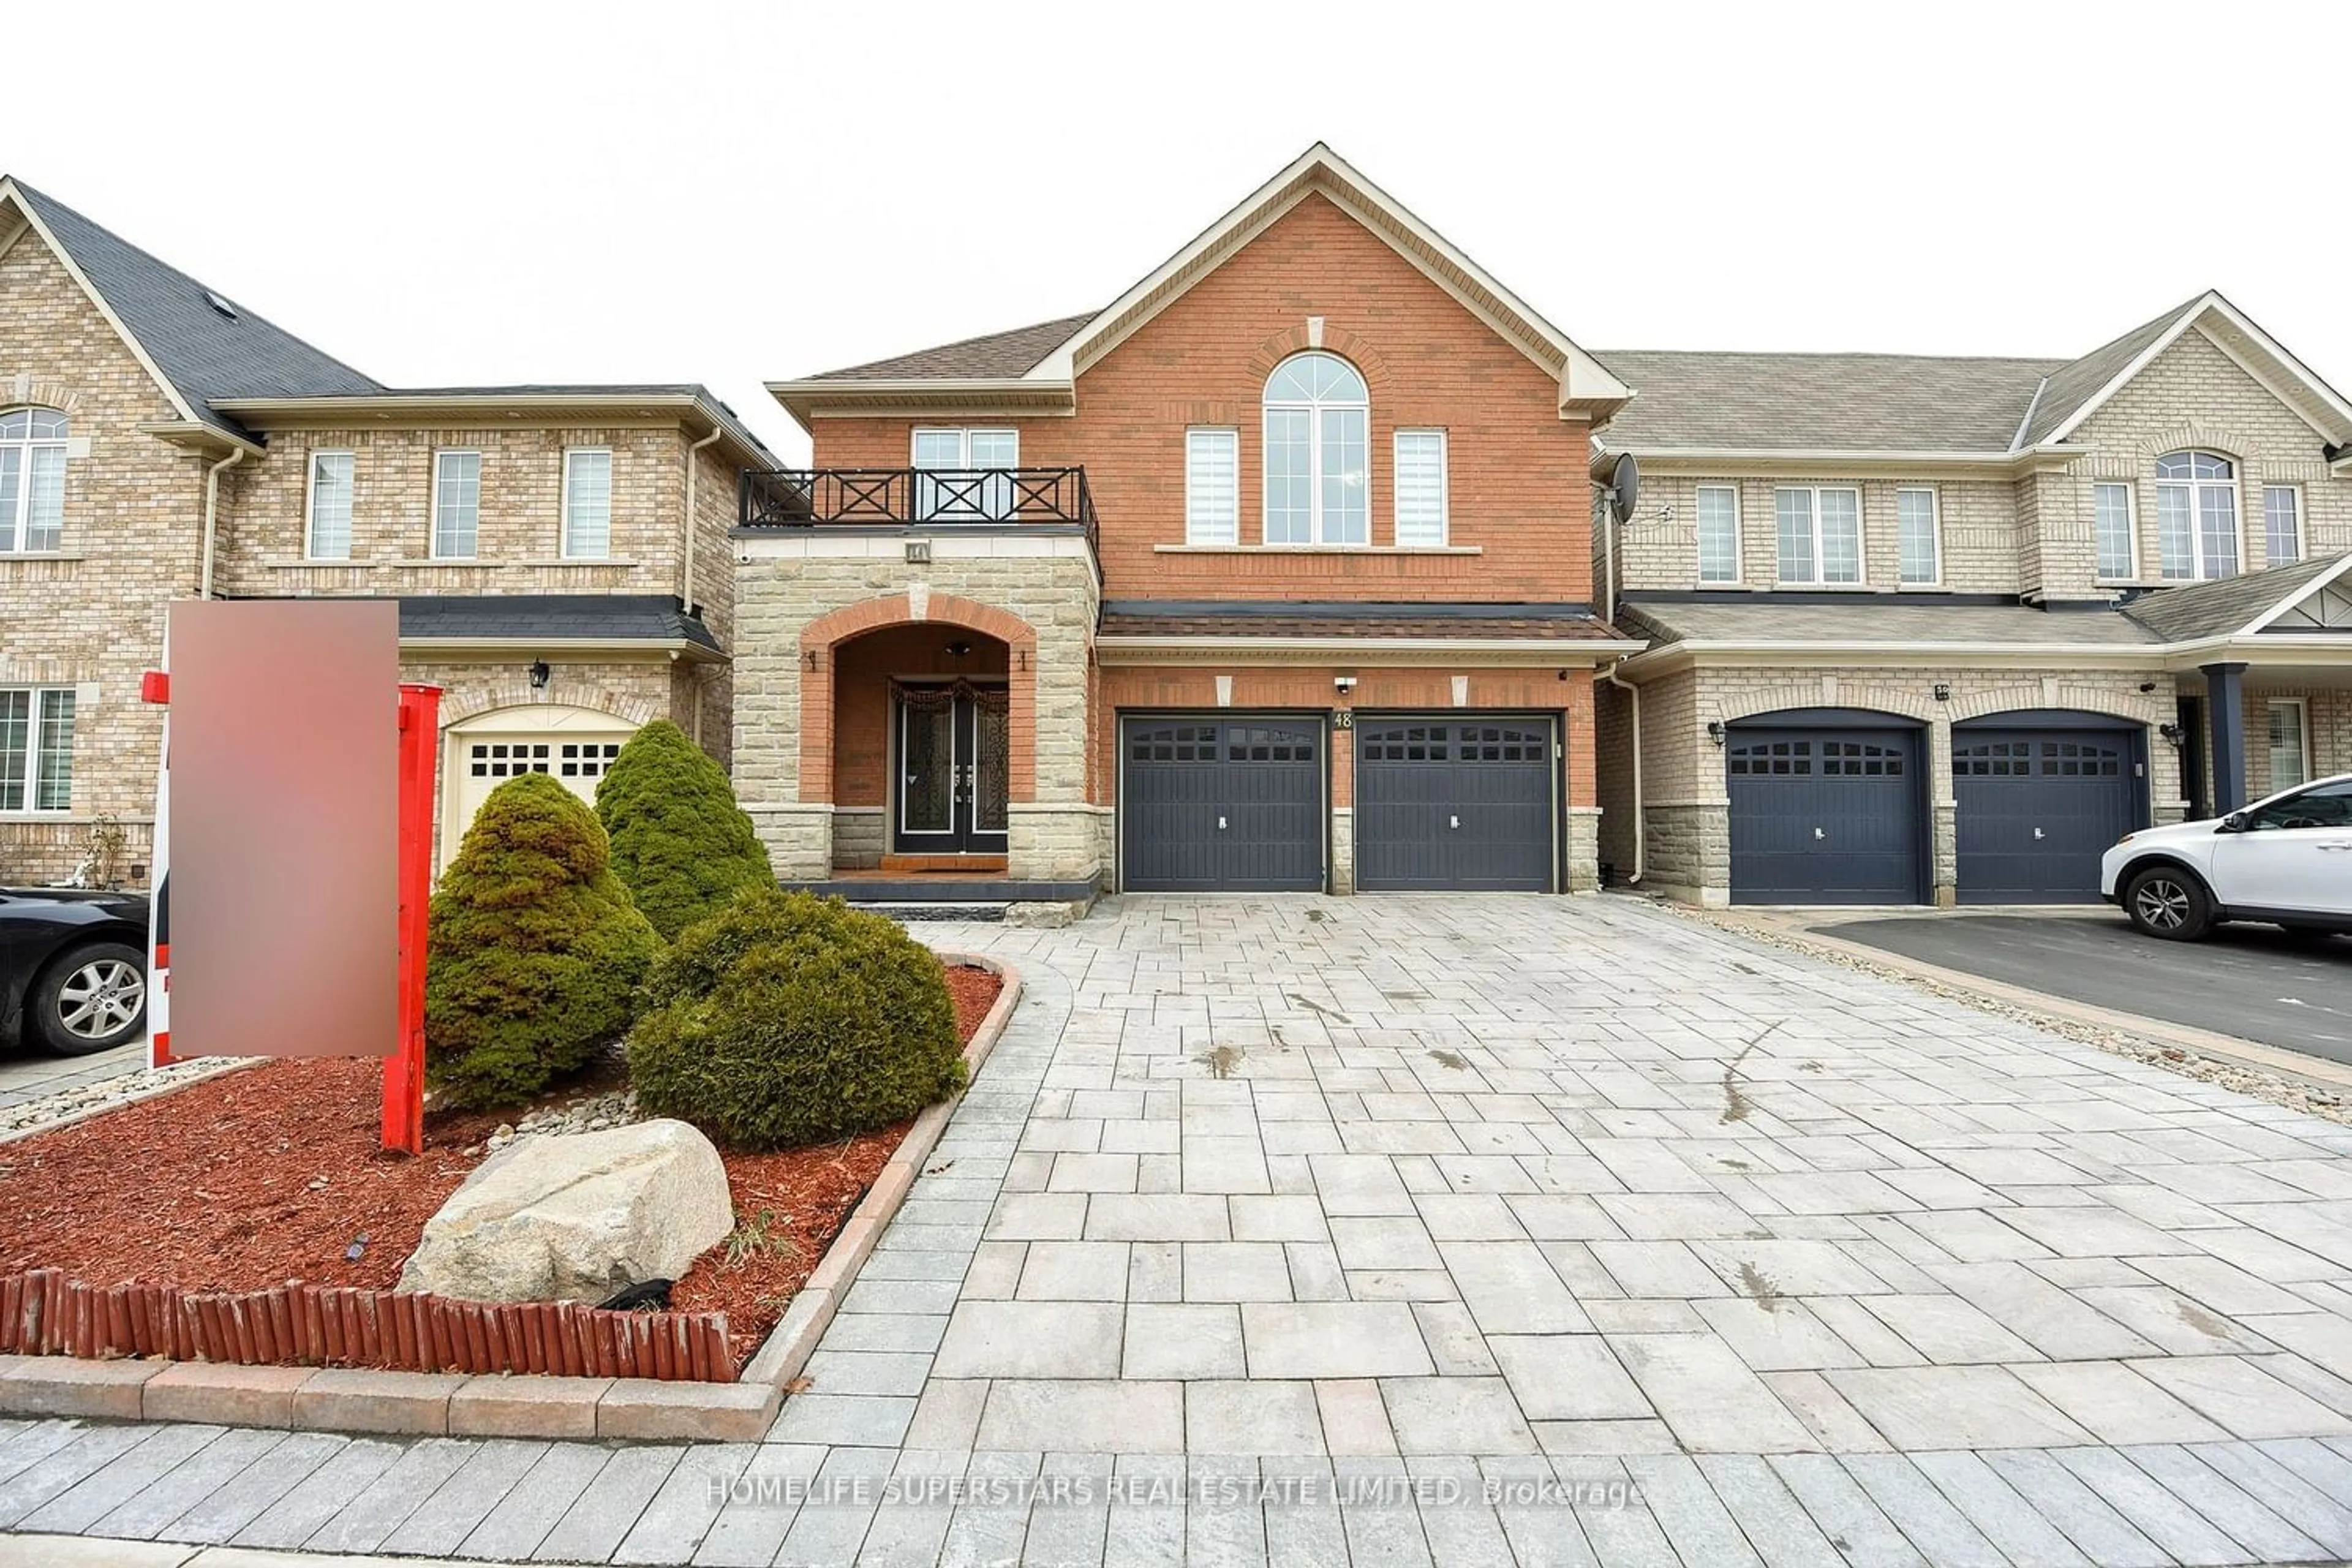 Home with brick exterior material for 48 Crystalhill Dr, Brampton Ontario L6P 3B1